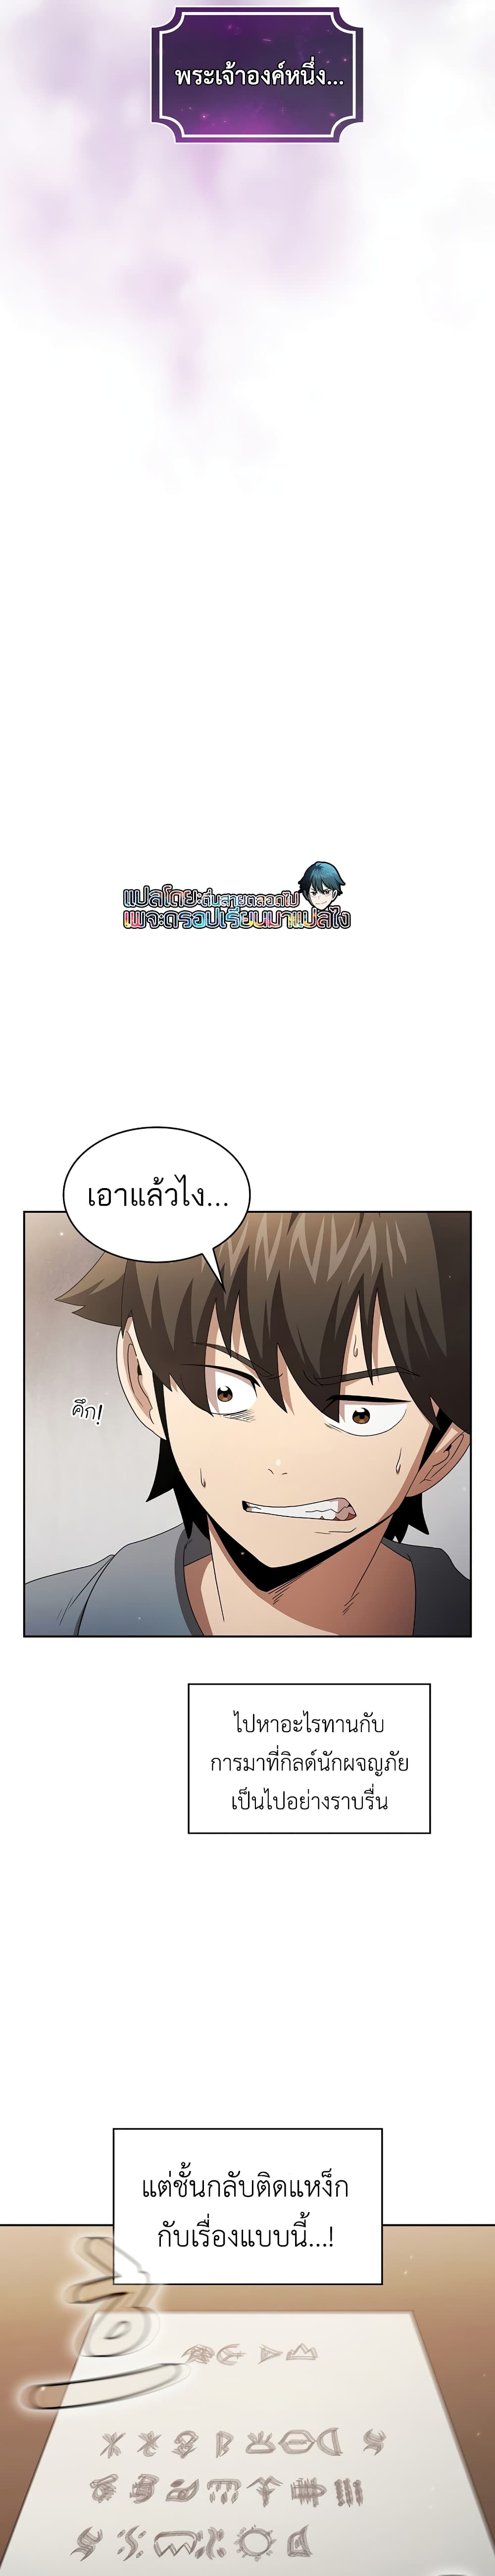 Is This Hero for Real à¸à¸­à¸à¸à¸µà¹ 31 (17)